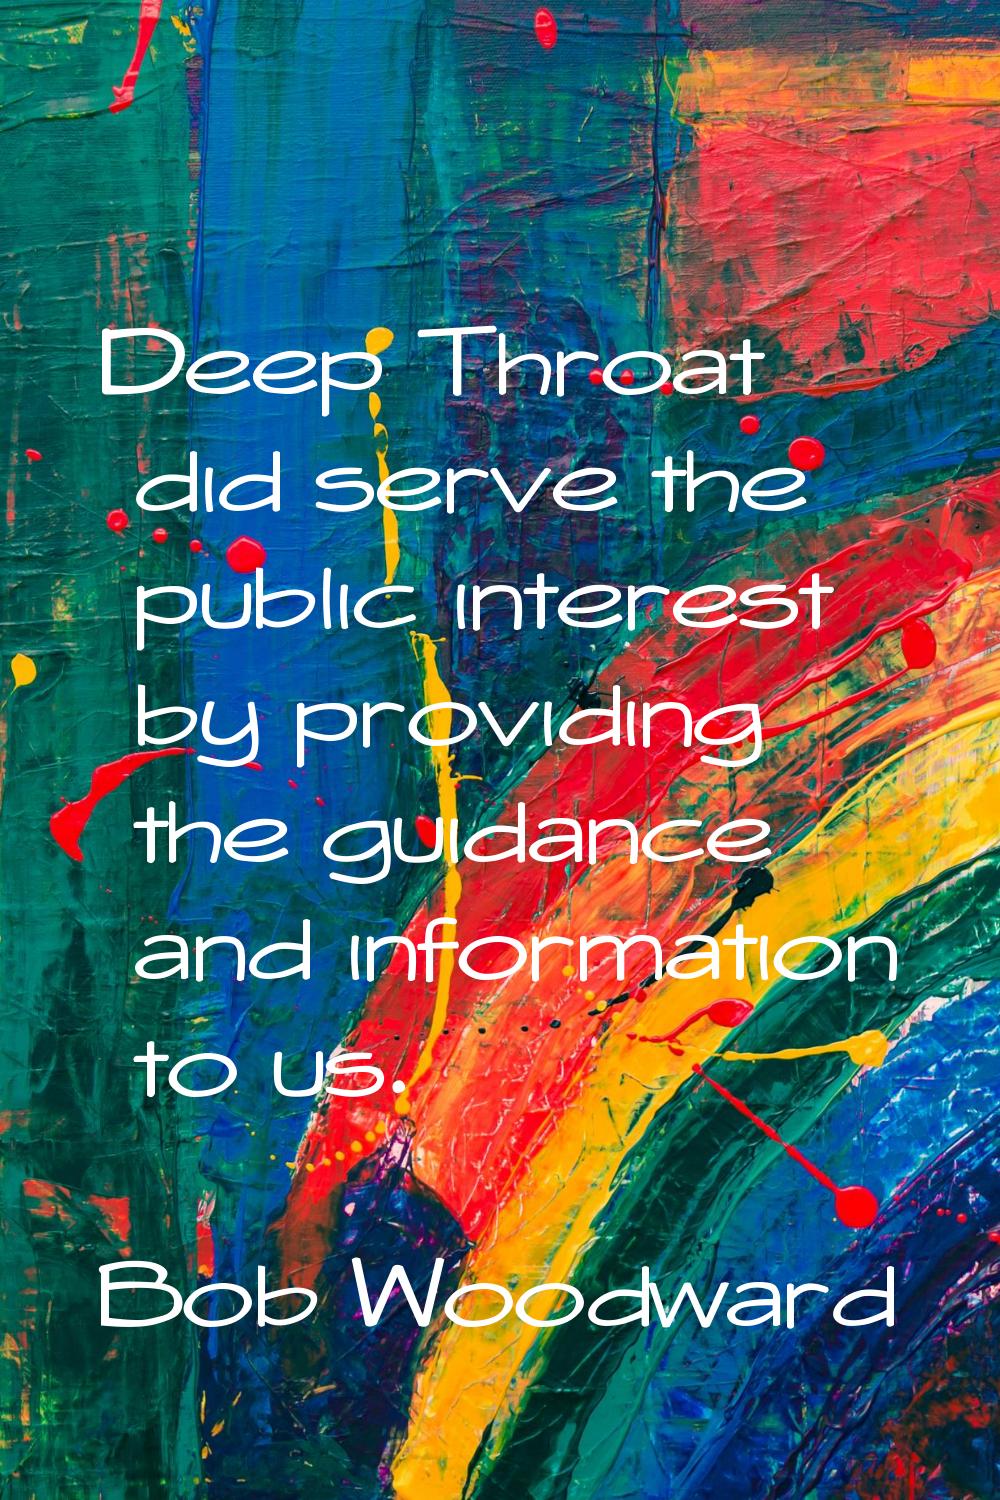 Deep Throat did serve the public interest by providing the guidance and information to us.